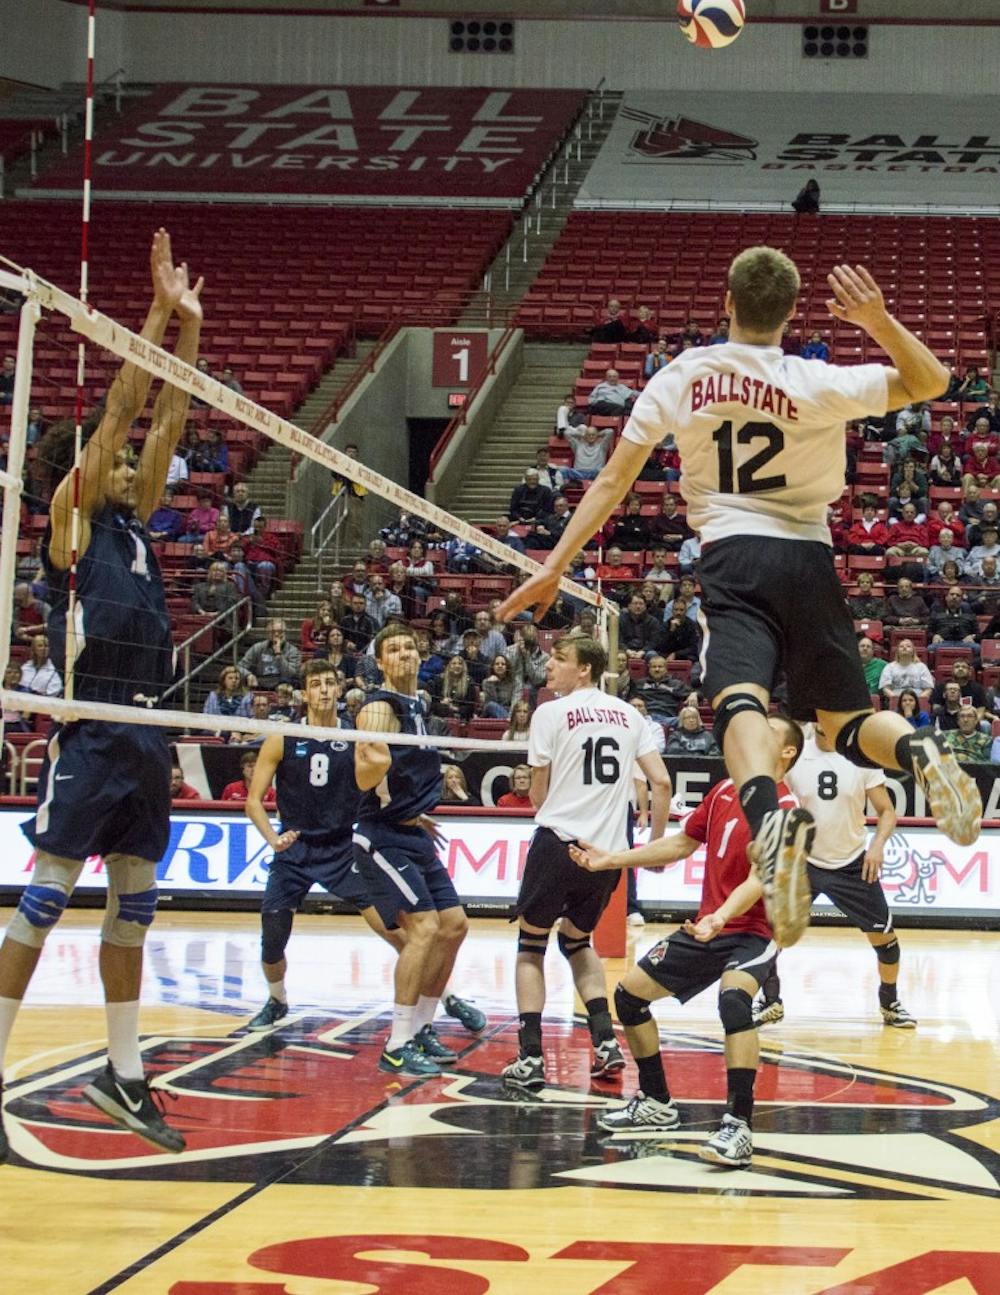 Senior Matt Sutherland hits the ball over the net during the game against Penn State on Jan. 16 at Worthen Arena. DN PHOTO ALAINA JAYE HALSEY